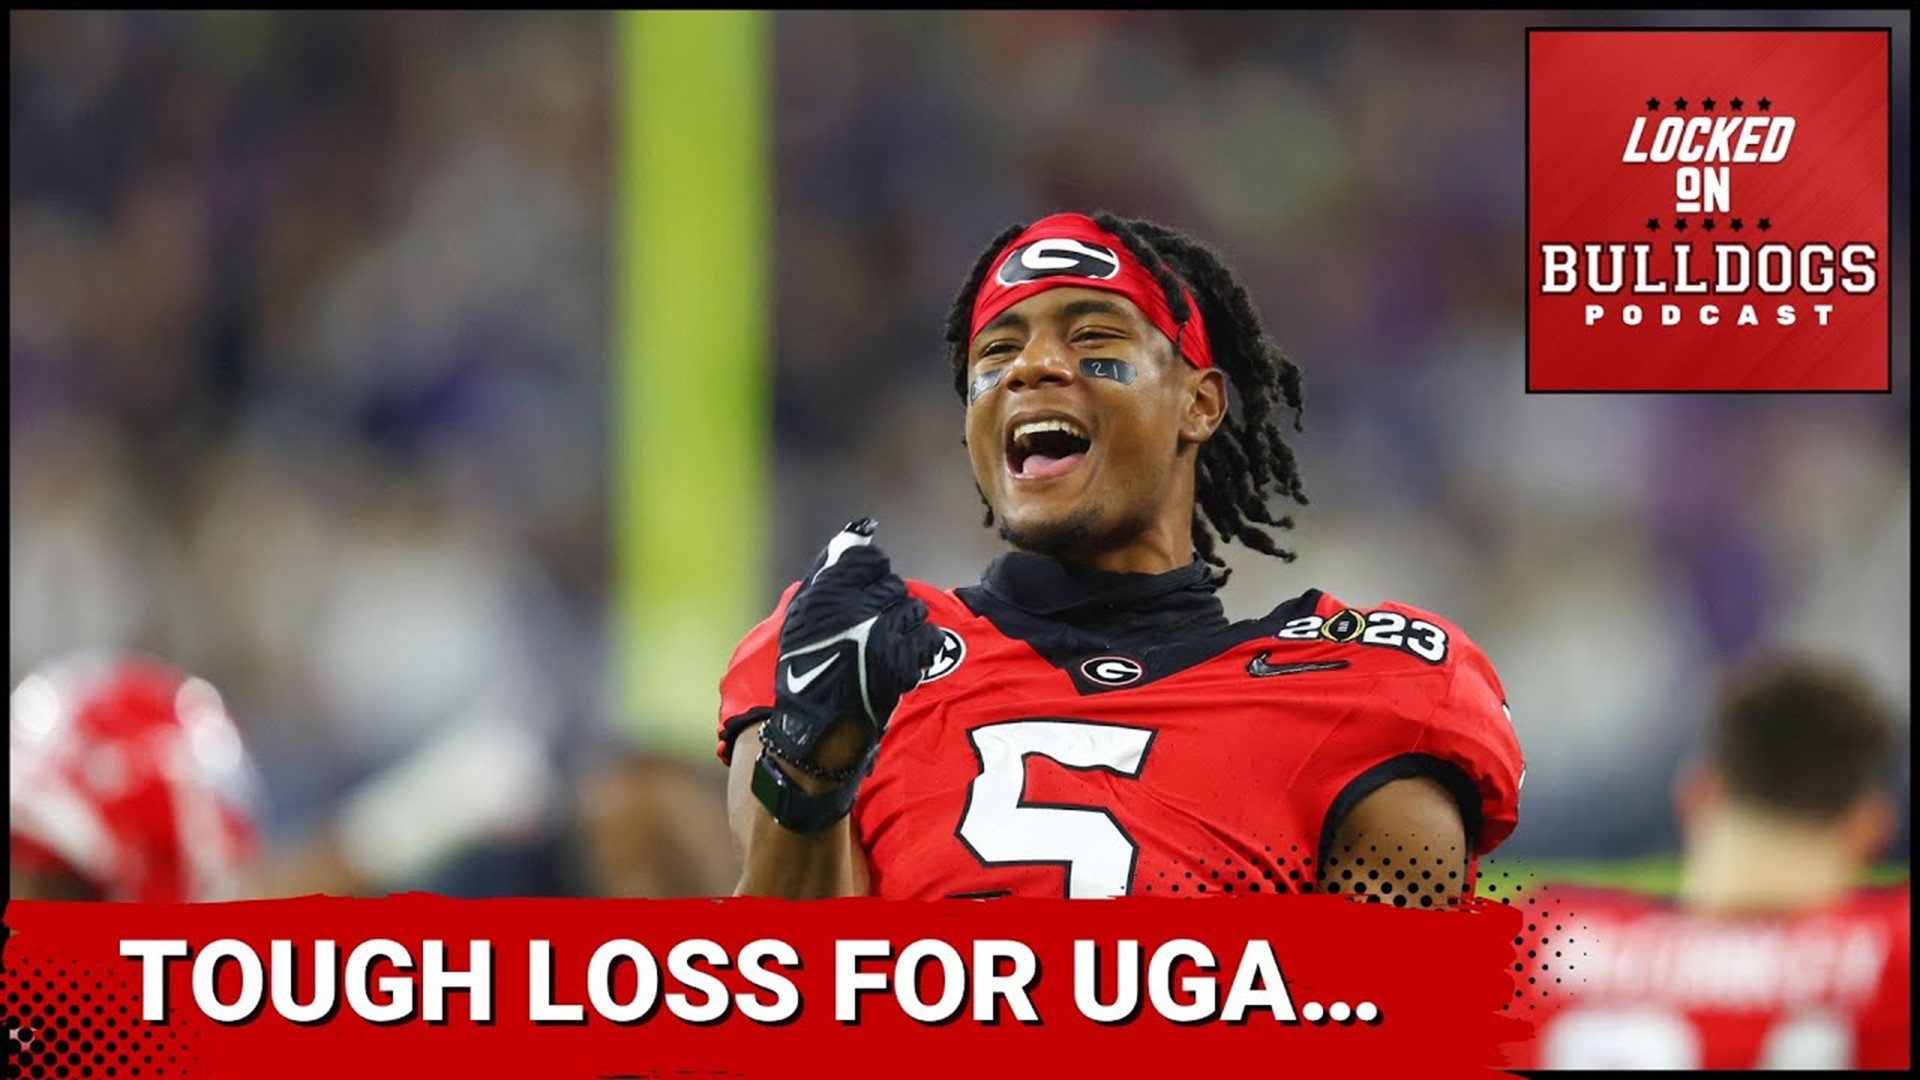 UGA loses AD Mitchell… what does it mean about the future???